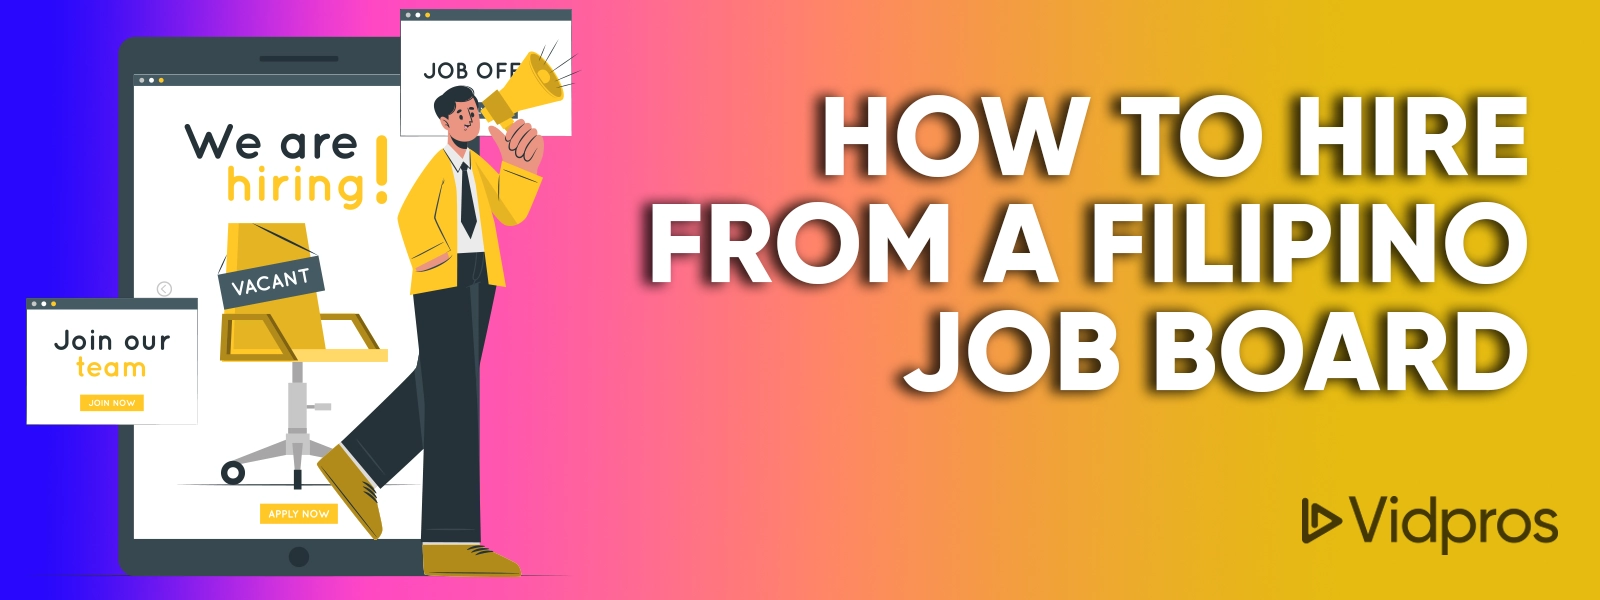 How to Hire From A Filipino Job Board